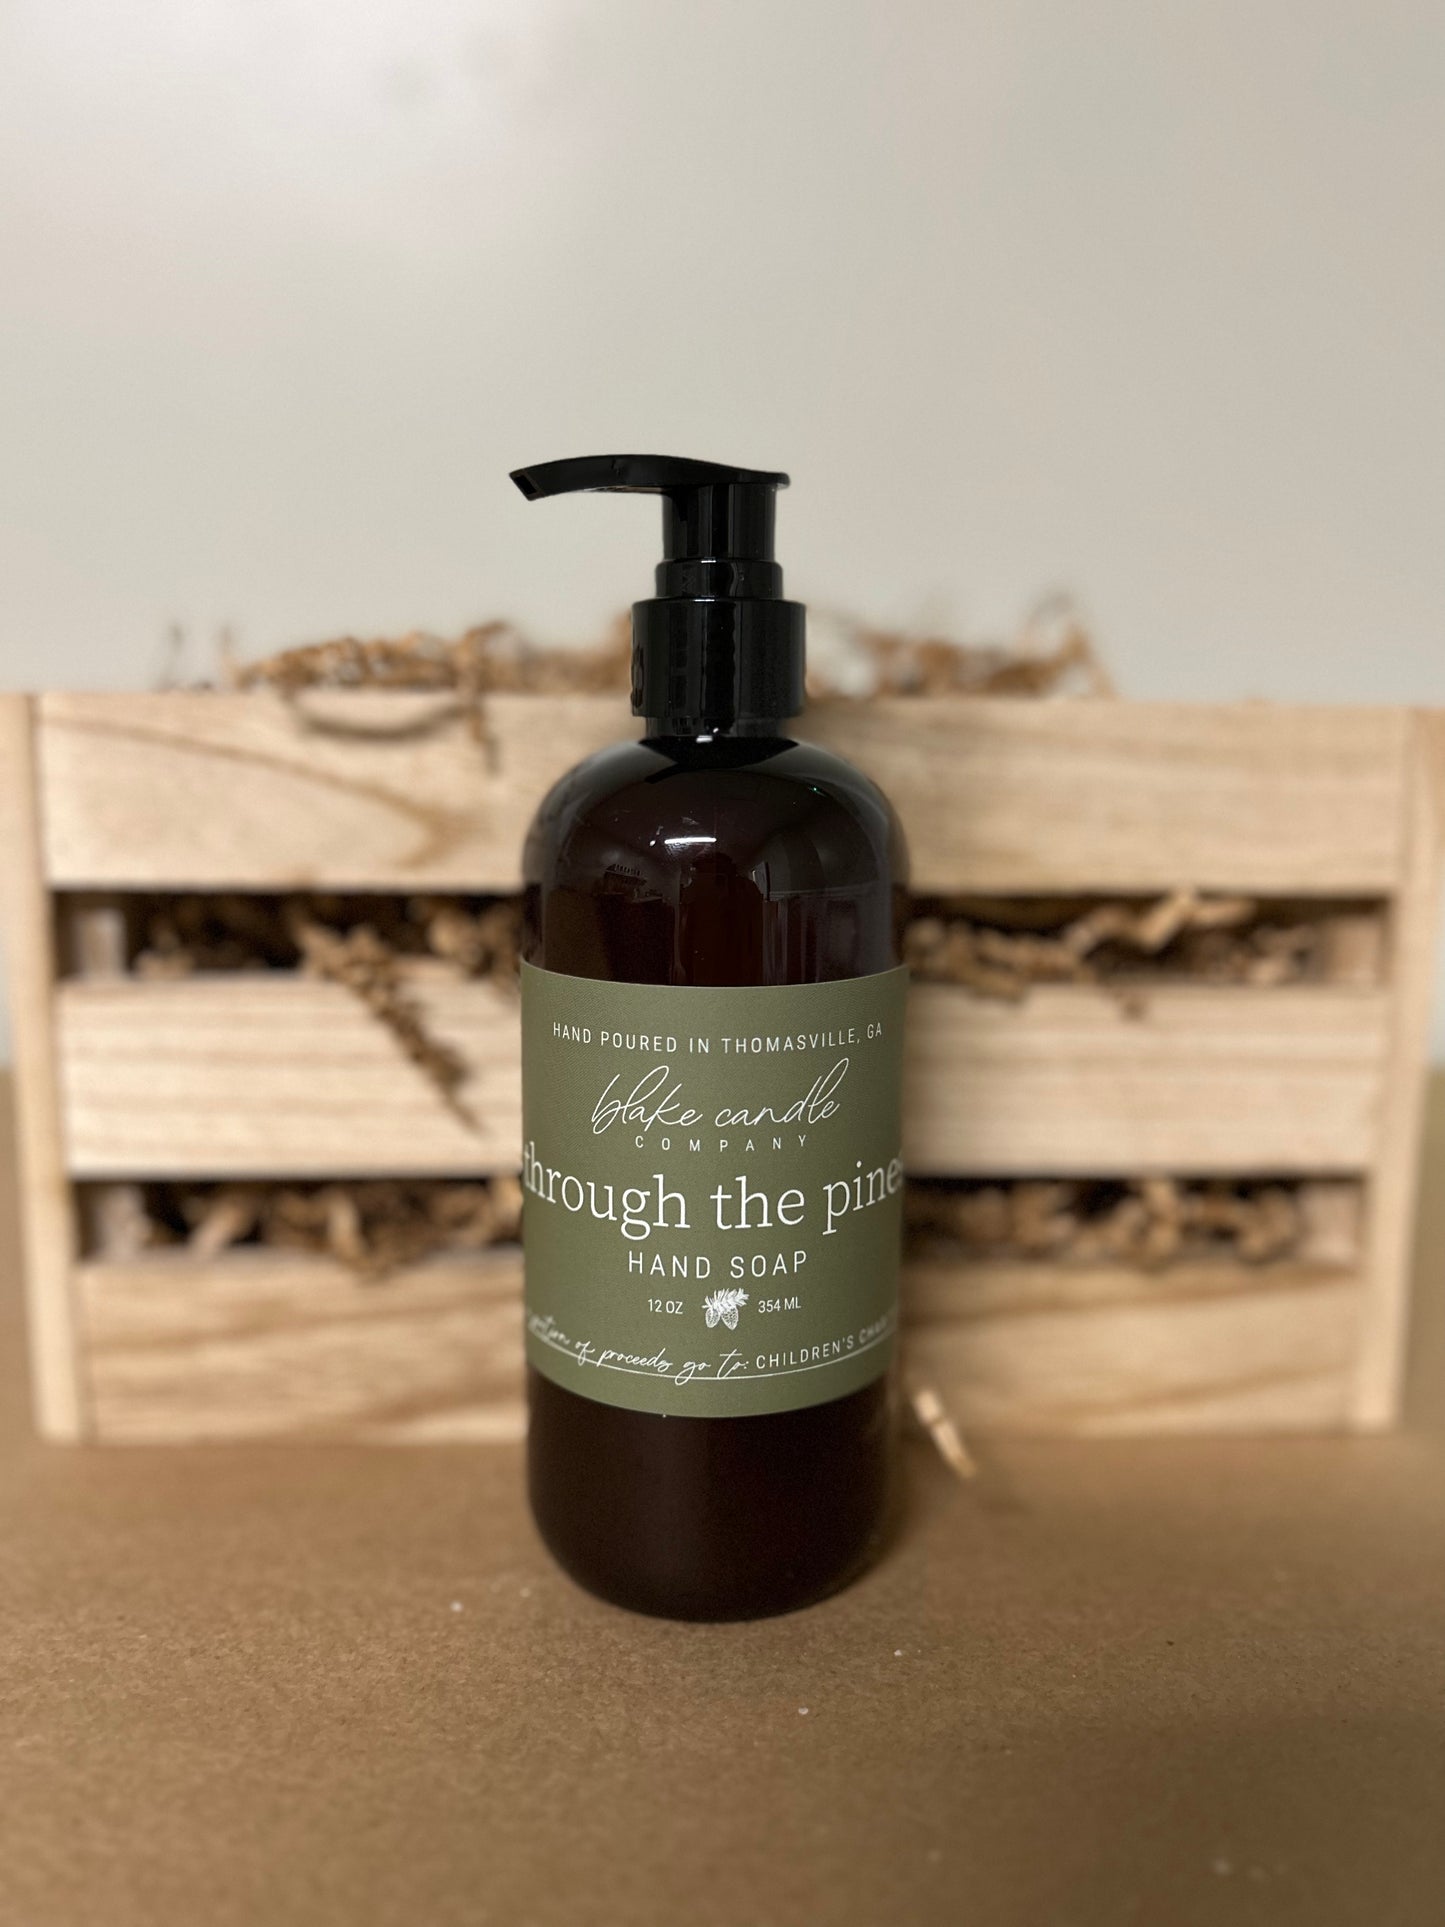 Through the Pines Hand Soap